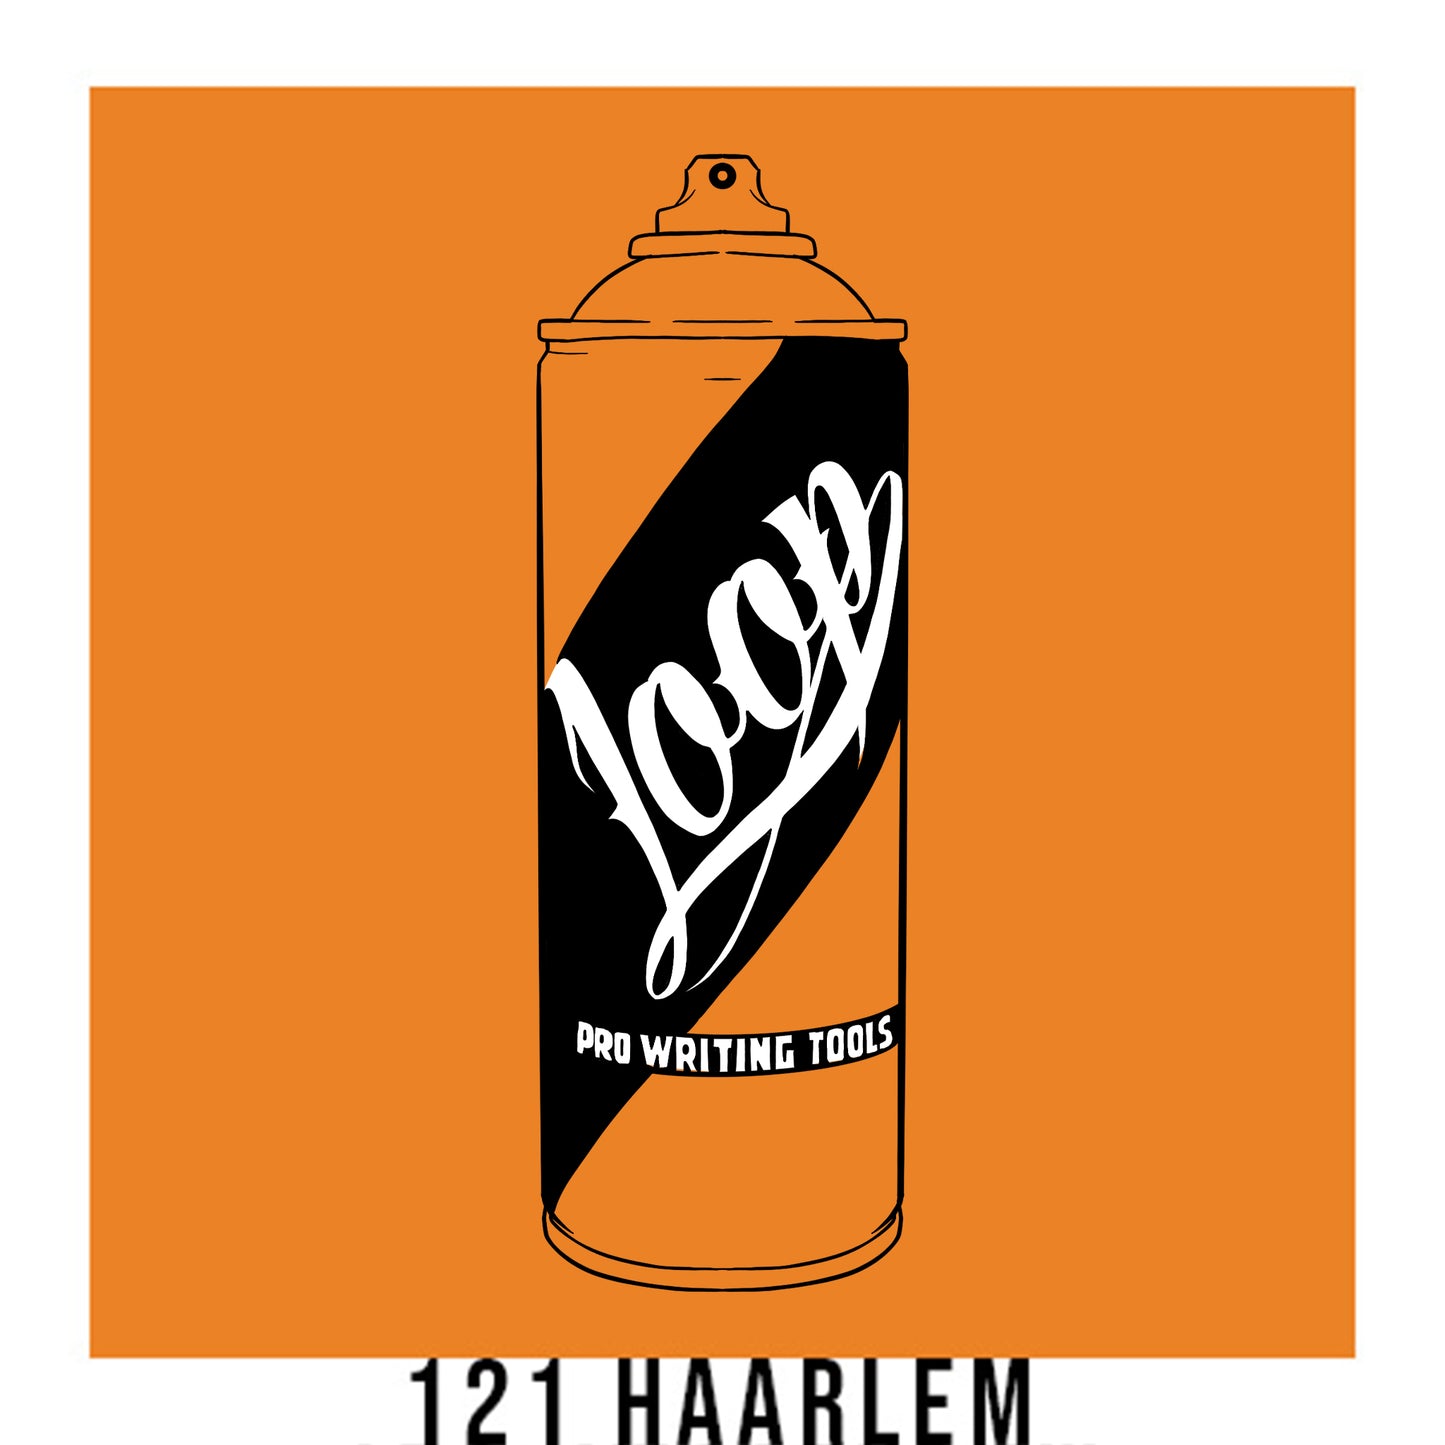 A black outline drawing of a orange spray paint can with the word "Loop" written on the face in script. The background is a color swatch of the same orange with a white border with the words "121 HAARLEM" at the bottom.